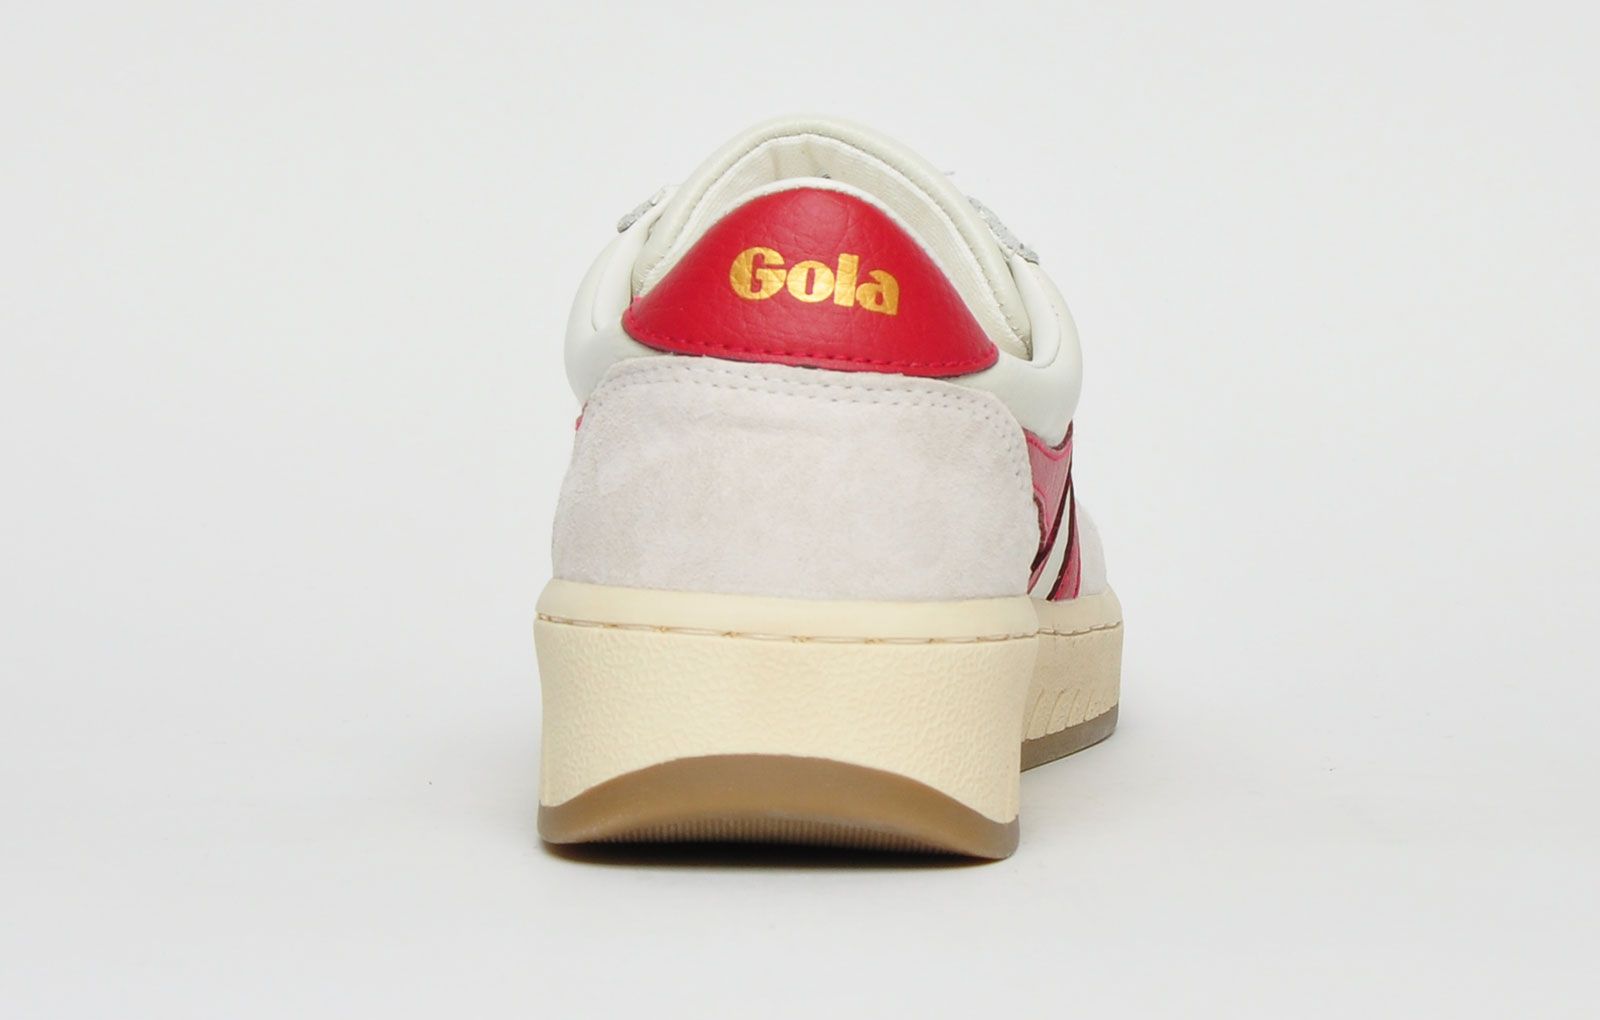 This Gola Classics Grandslam 78 is an on-trend silhouette paying homage to Gola’s British roots with the application of an off white and red colourway and contrast vintage styled outsole. <p>Tonal laces, suede trims and iconic Gola signature details finish the Grandslam 78 trainers off in style.</p> <p>- Leather upper</p> <p>- Vintage retro styling</p> <p>- Secure lace up system</p> <p>- Vintage styled outsole</p> <p>- Gola classic branding throughout</p>